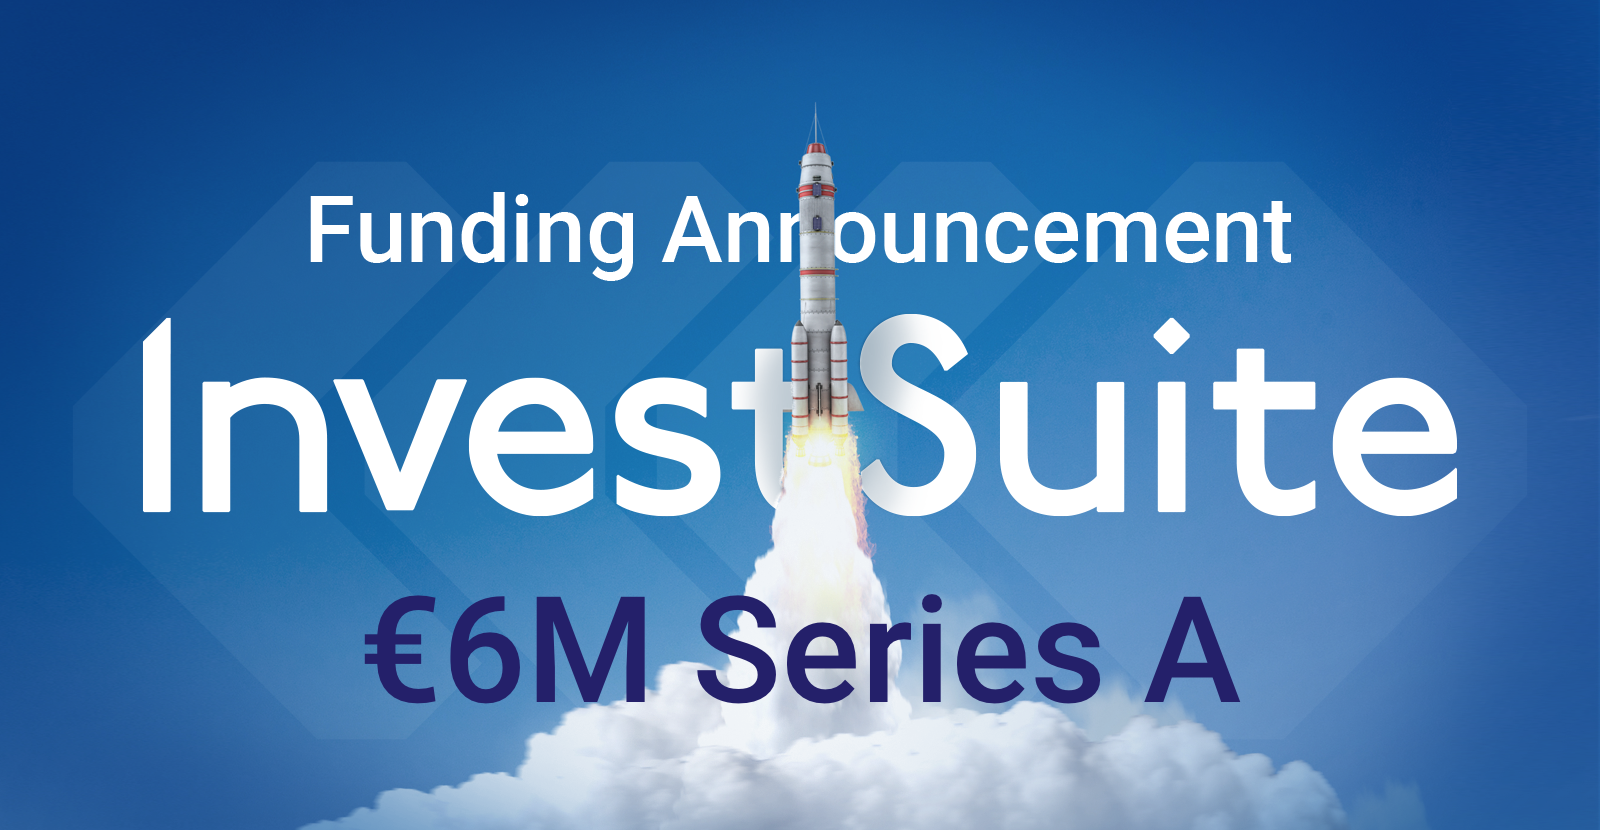 InvestSuite secures €6 million in Series A funding round